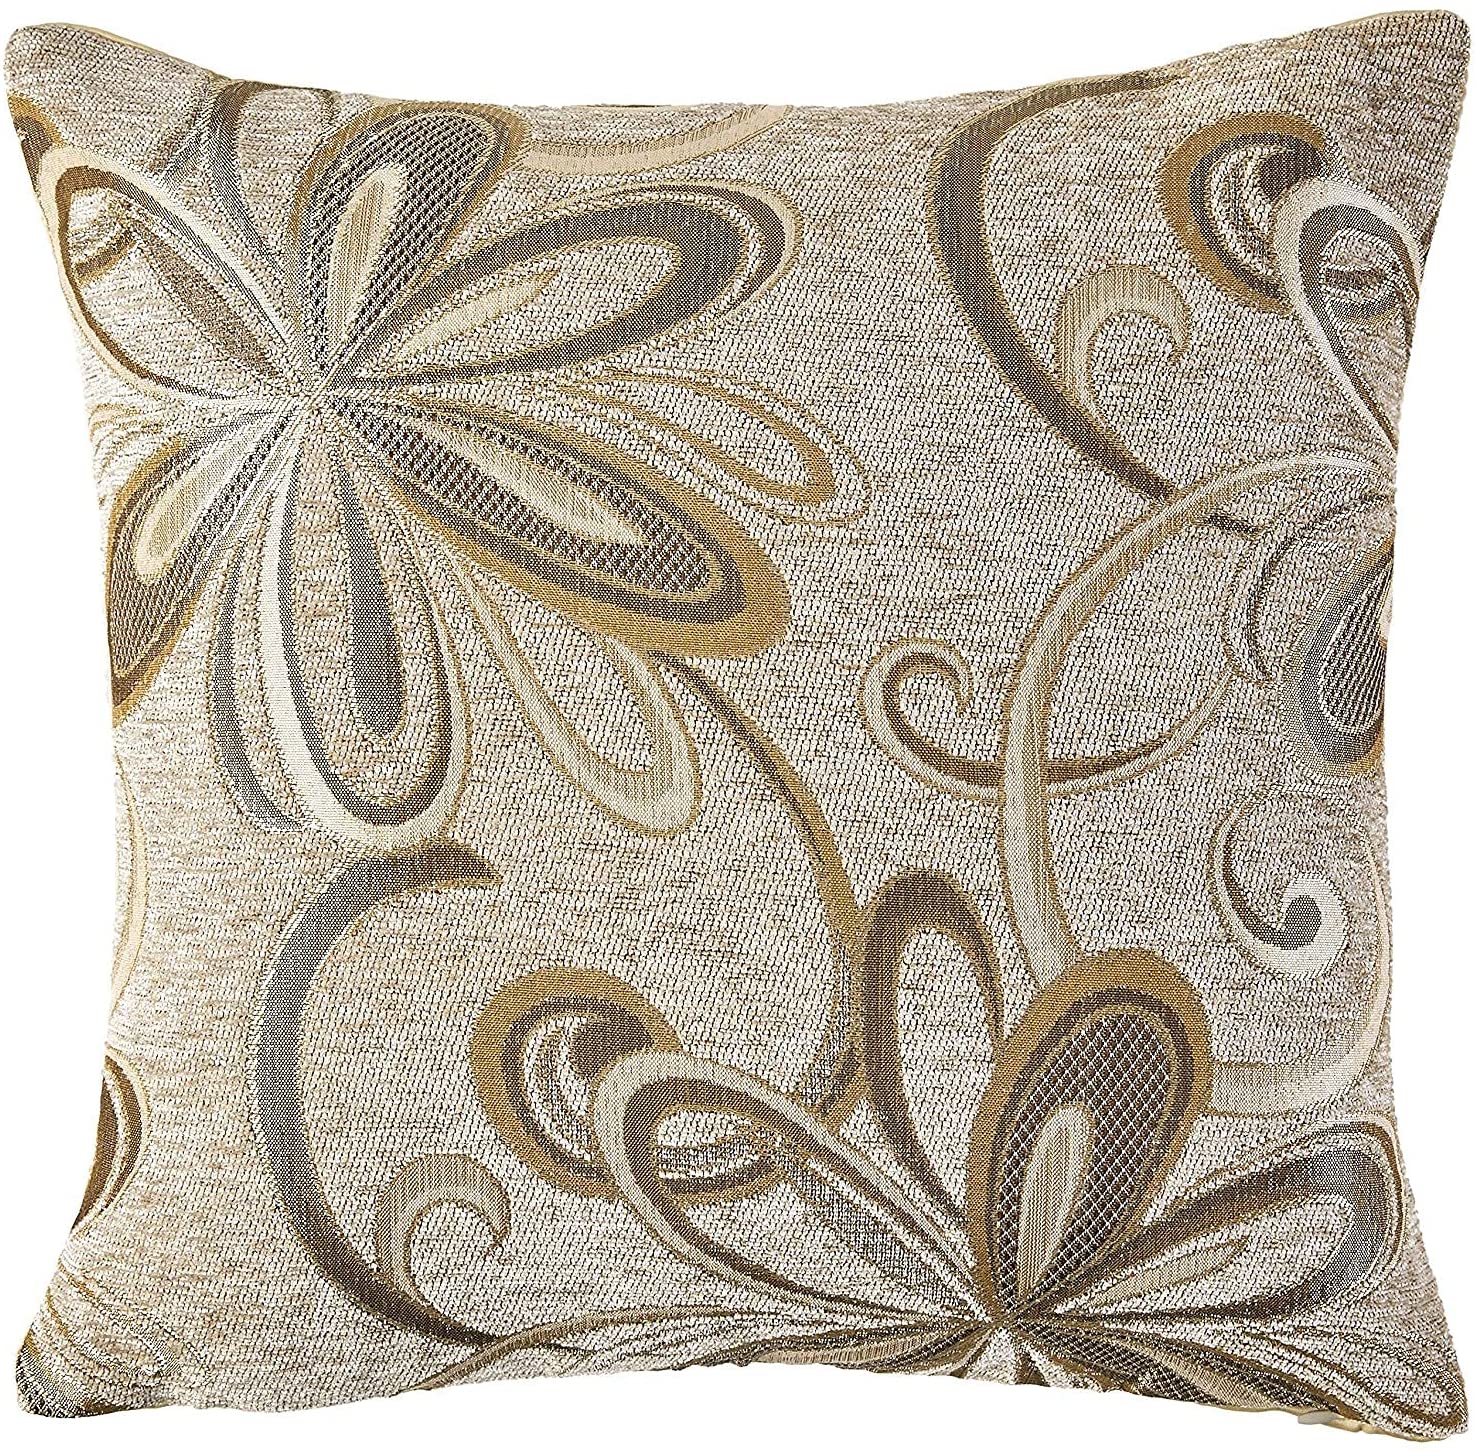 Chateau Chenille Vintage Floral Design Decorative Cushion Cover 18 x 18 Inches